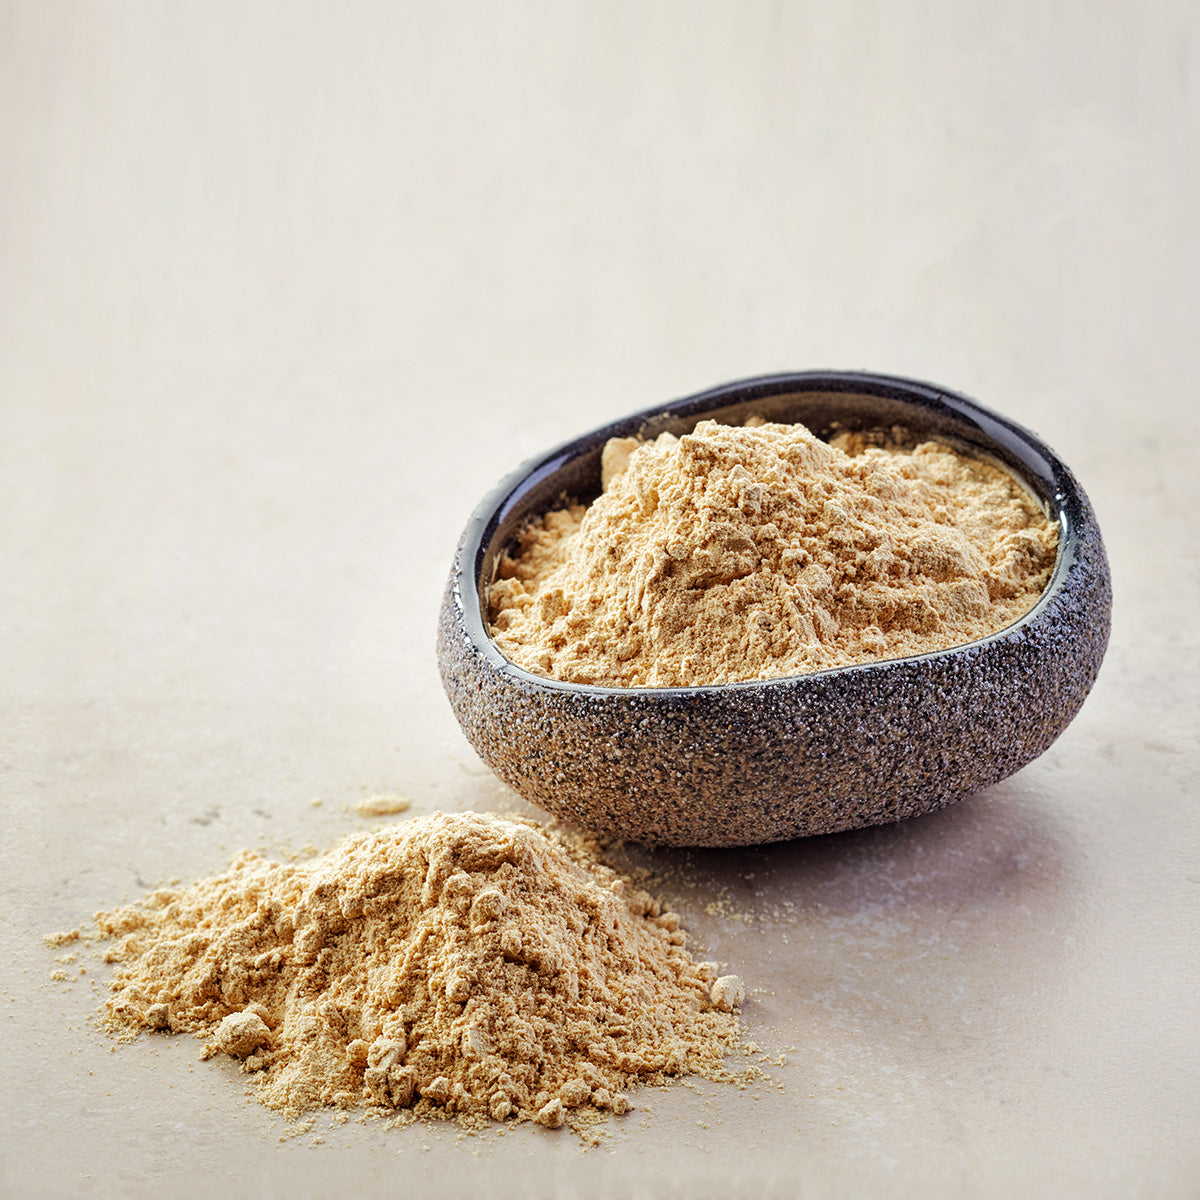 11 Myths About Maca Debunked